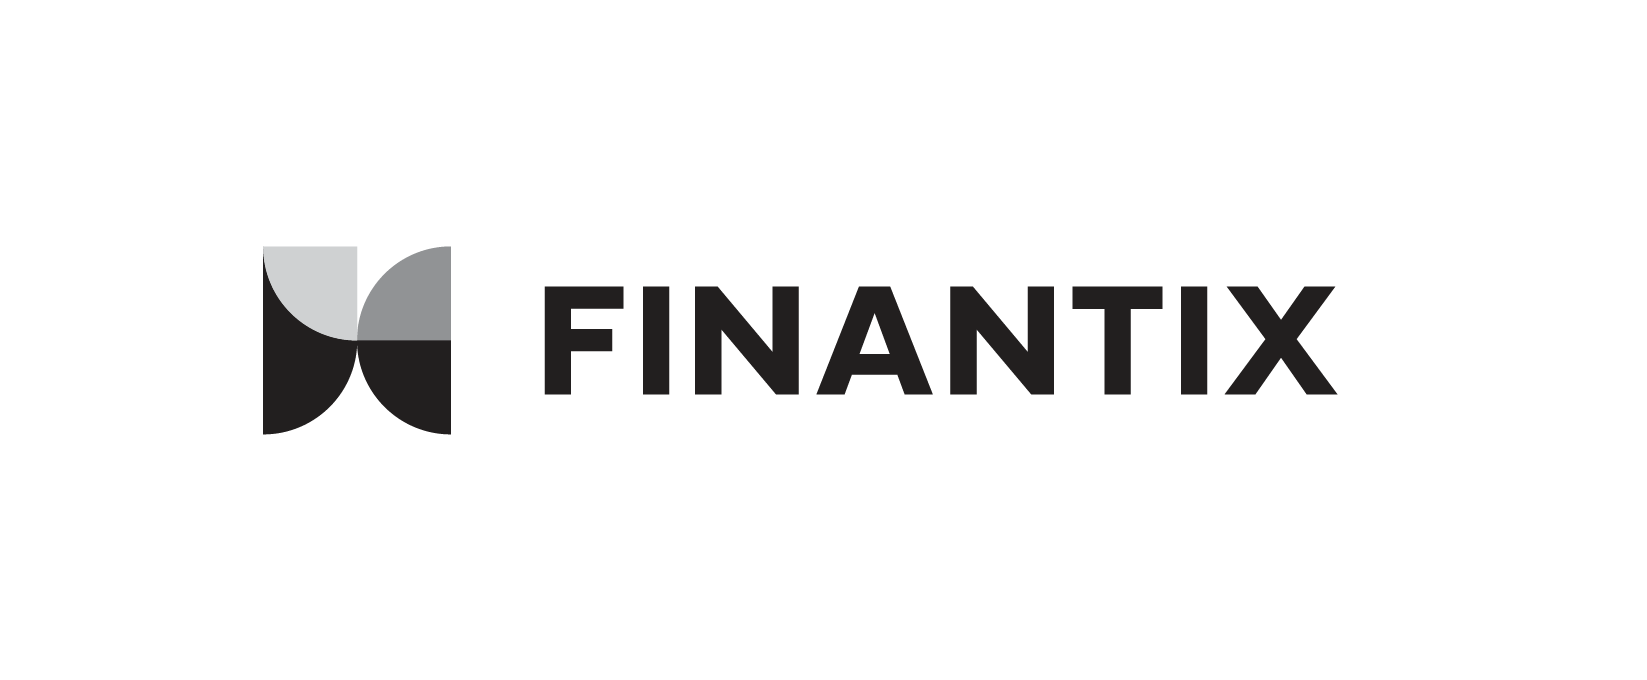 Finantix acquires InCube, a Swiss AI and data science company dedicated to wealth management and insurance